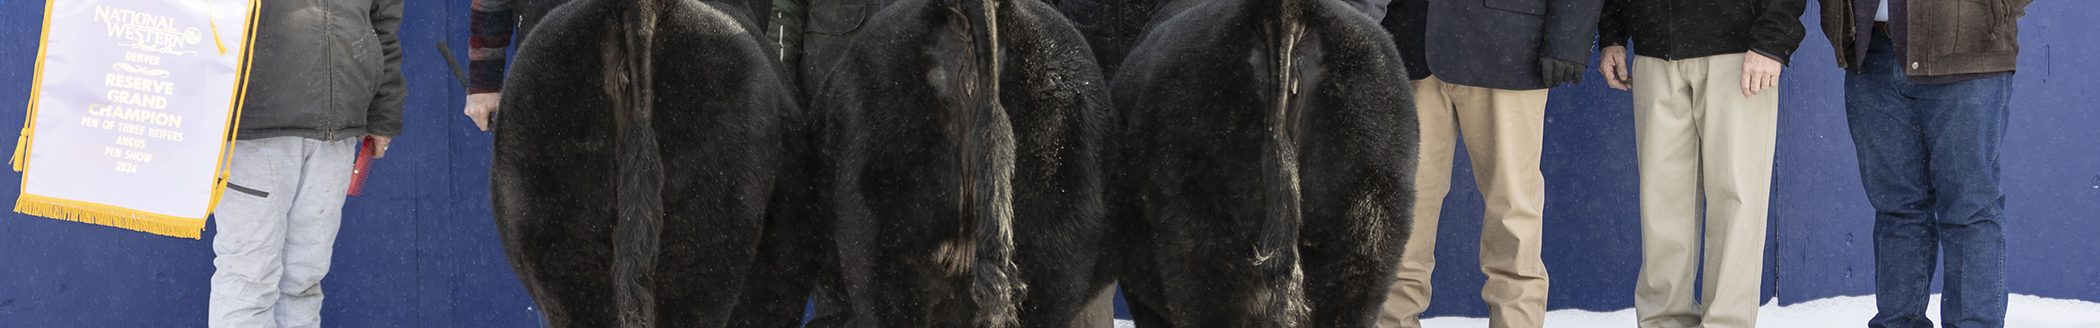 Bar S Ranch Inc., Paradise, Kansas, won reserve grand champion pen of three heifers at the 2024 National Western Stock Show's Angus Pen and Carload Show, Jan. 13, in Denver, Colorado. The April 2023 heifers posted an average weight of 870 pounds and are sired by Sitz Barricade 632F. The trio earlier won late calf champion. Adam Sawyer, Bassett, Nebraska; Doug Stevenson, Laurel, Montana; and John Toledo, Visalia, Calififornia, evaluated the two carloads and 22 pens. (Photo courtesy of Legacy Livestock Imaging.)